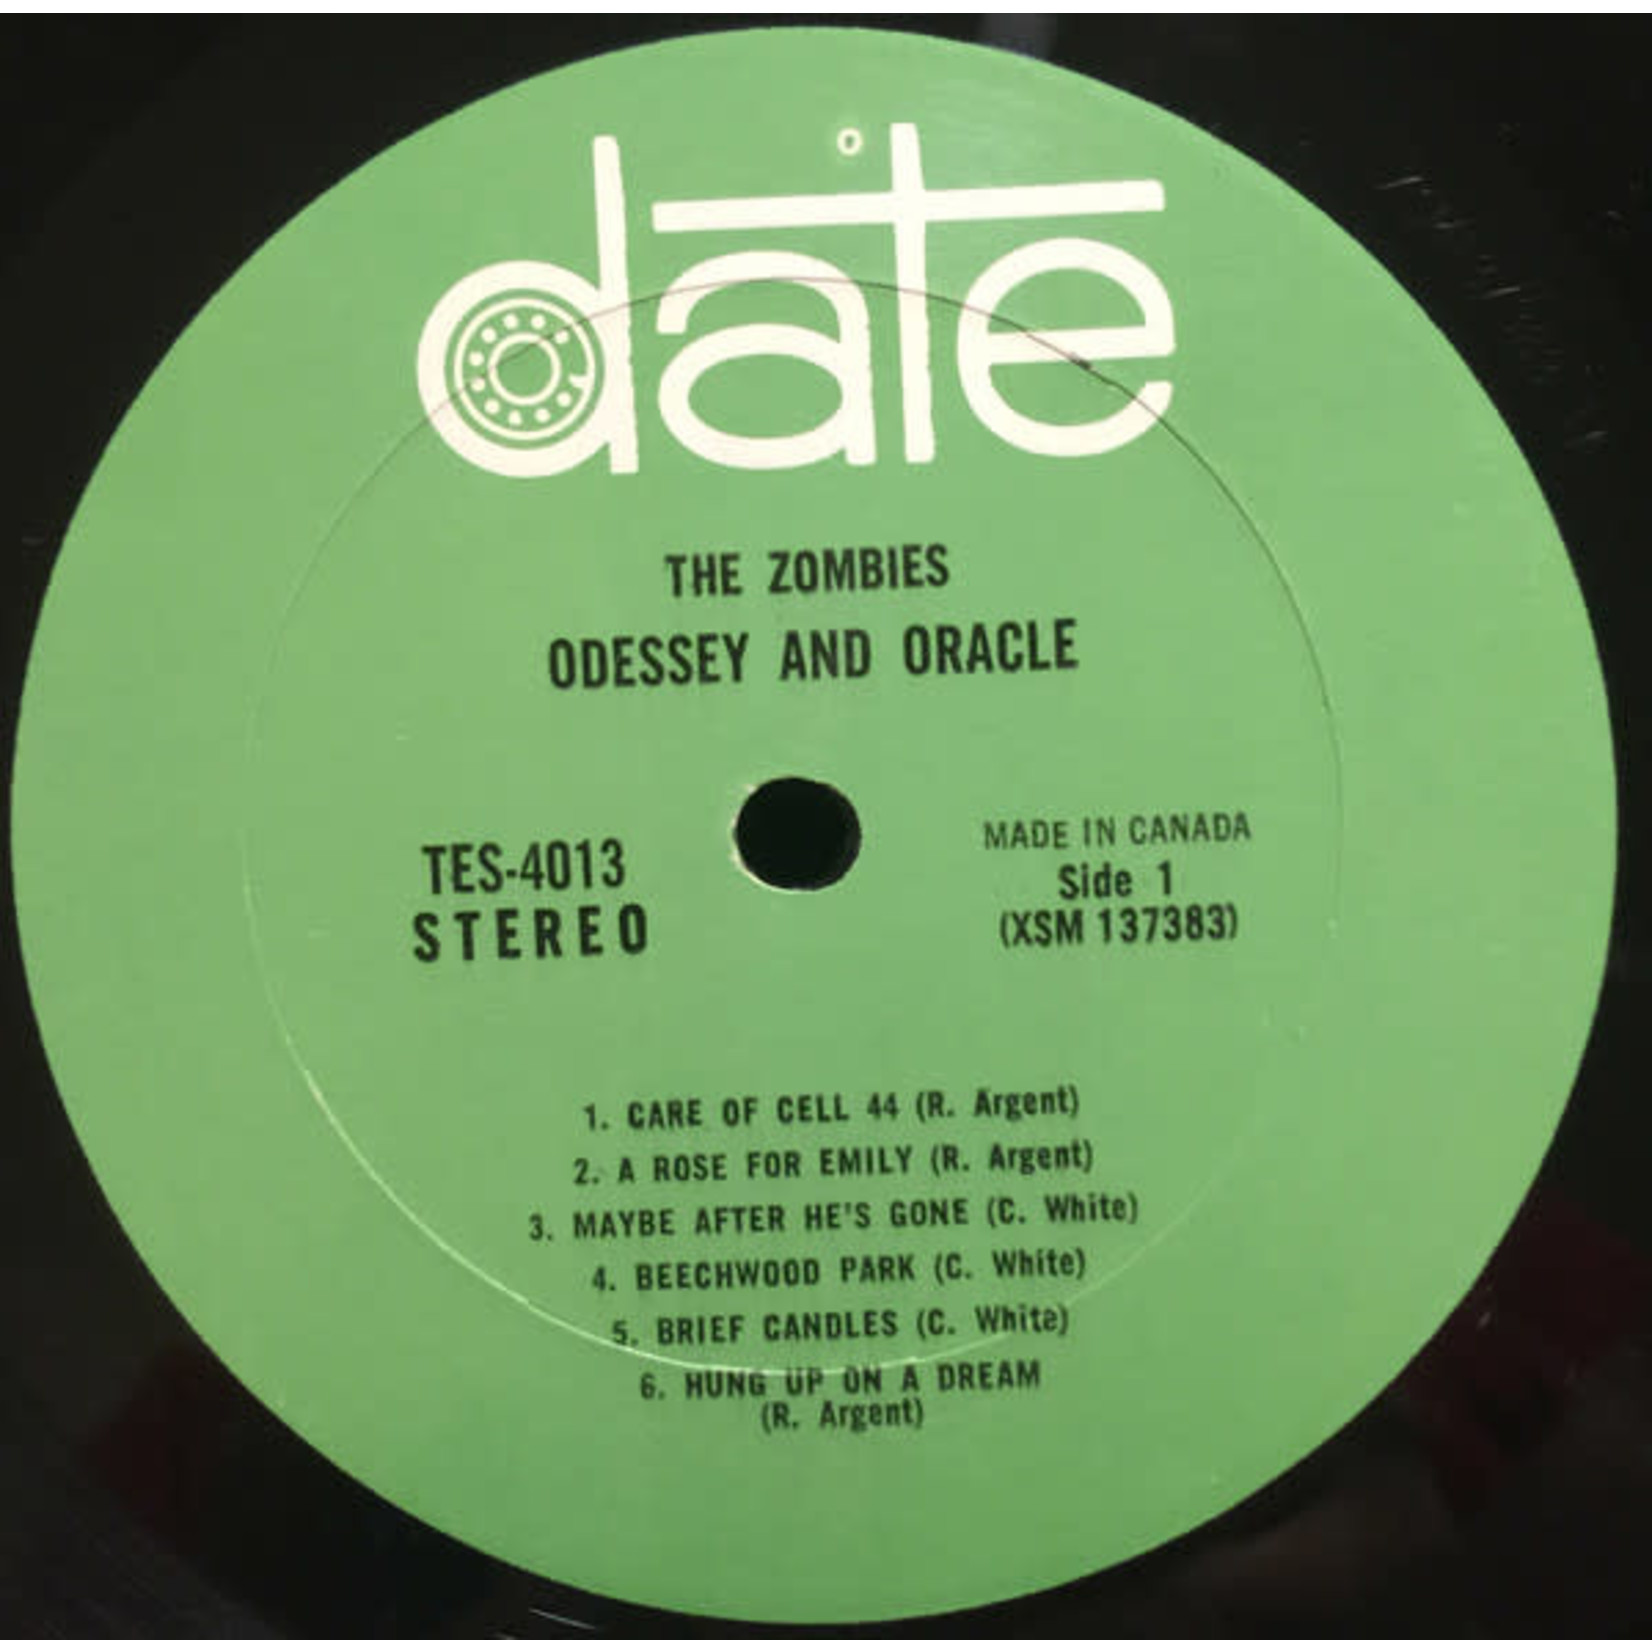 [Vintage] Zombies - Odyssey & Oracle (stereo, VG)